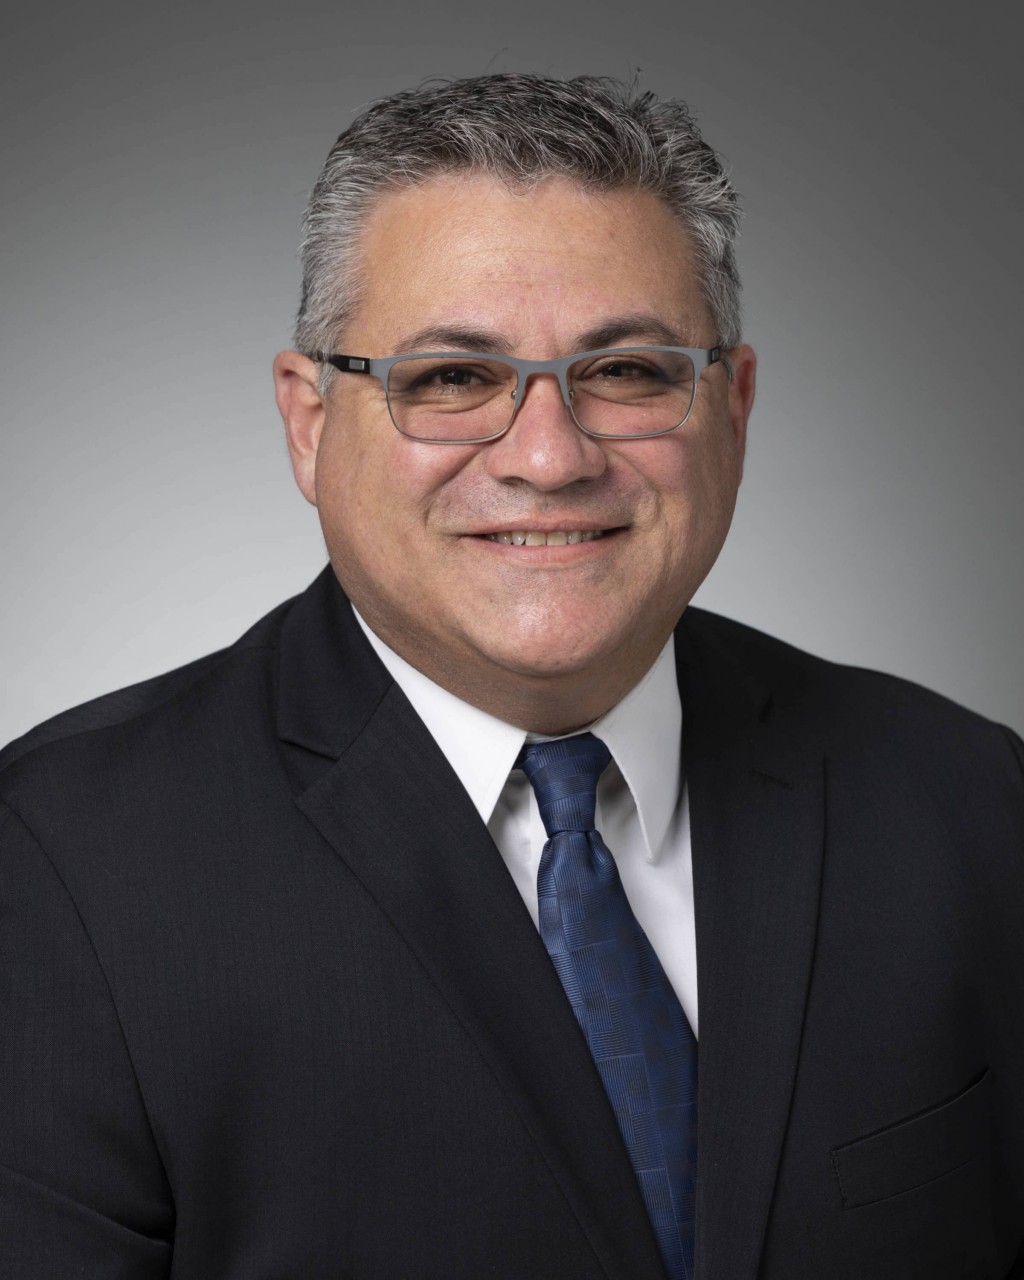 TINKER FEDERAL CREDIT UNION NAMES  CRIS GARZA AS MANAGER OF CHOCTAW BRANCH